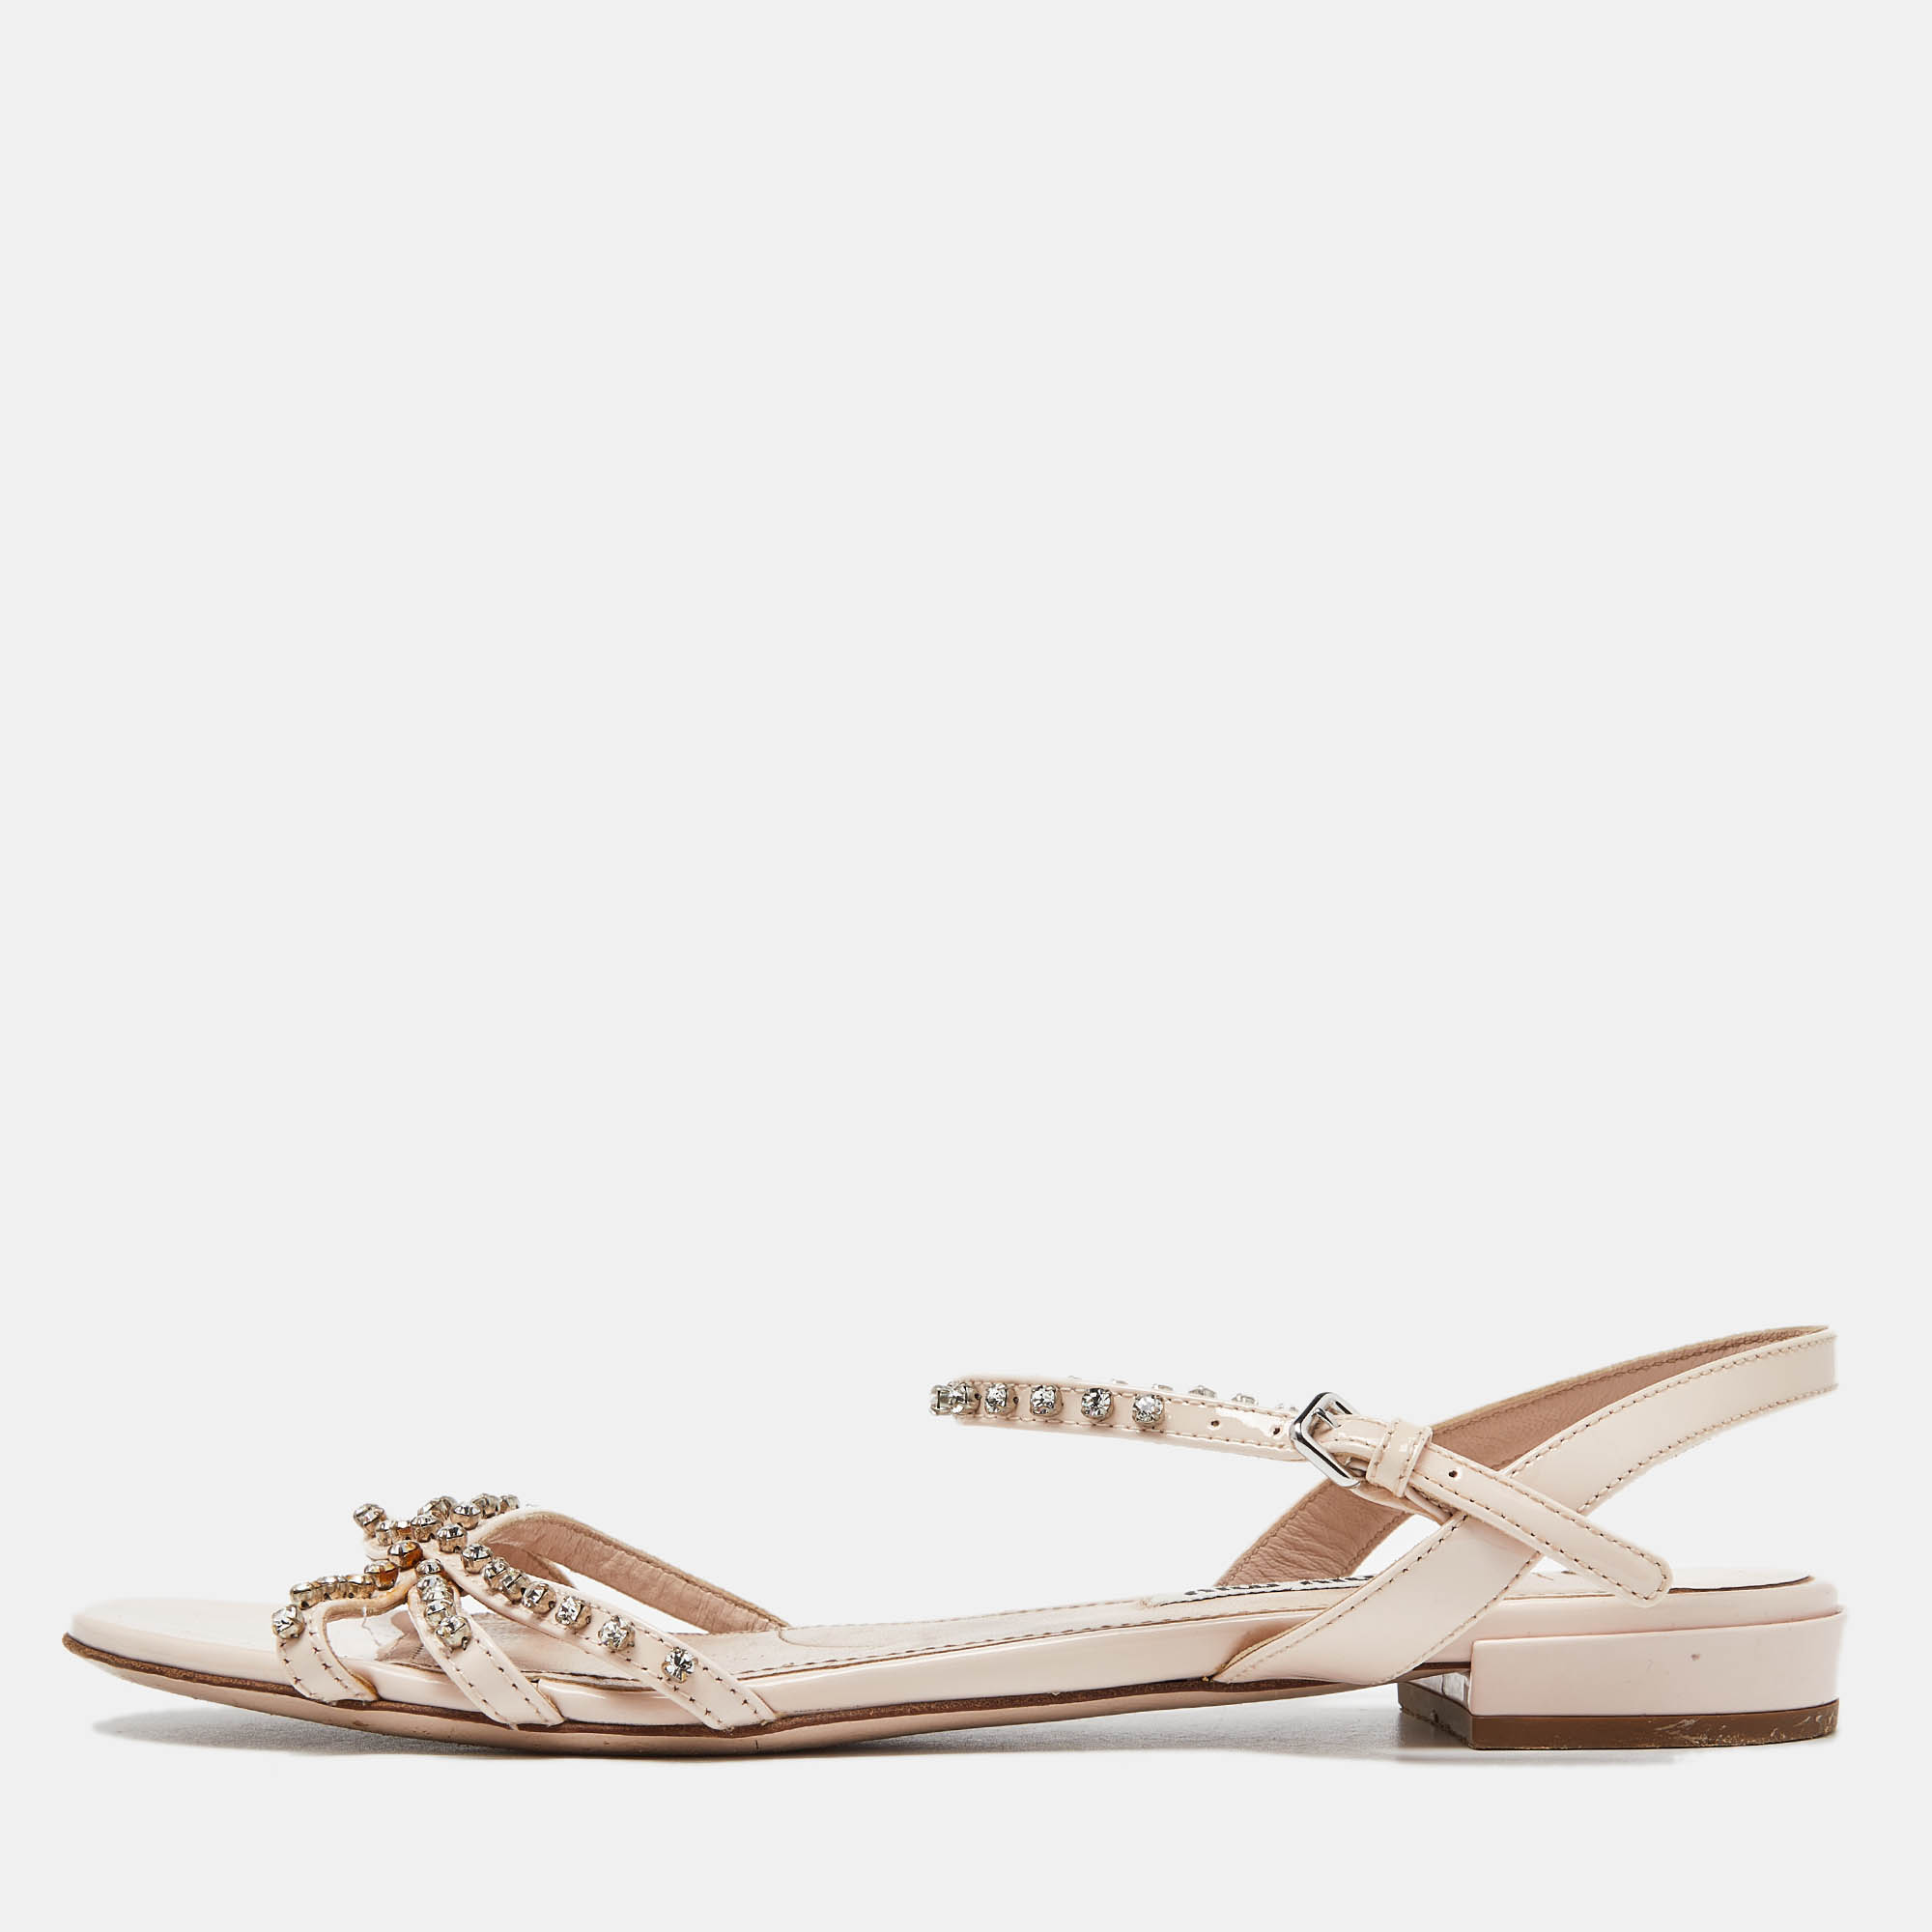 

Miu Miu Pink Patent Leather Strappy Crystal Embellished Flat Sandals Size